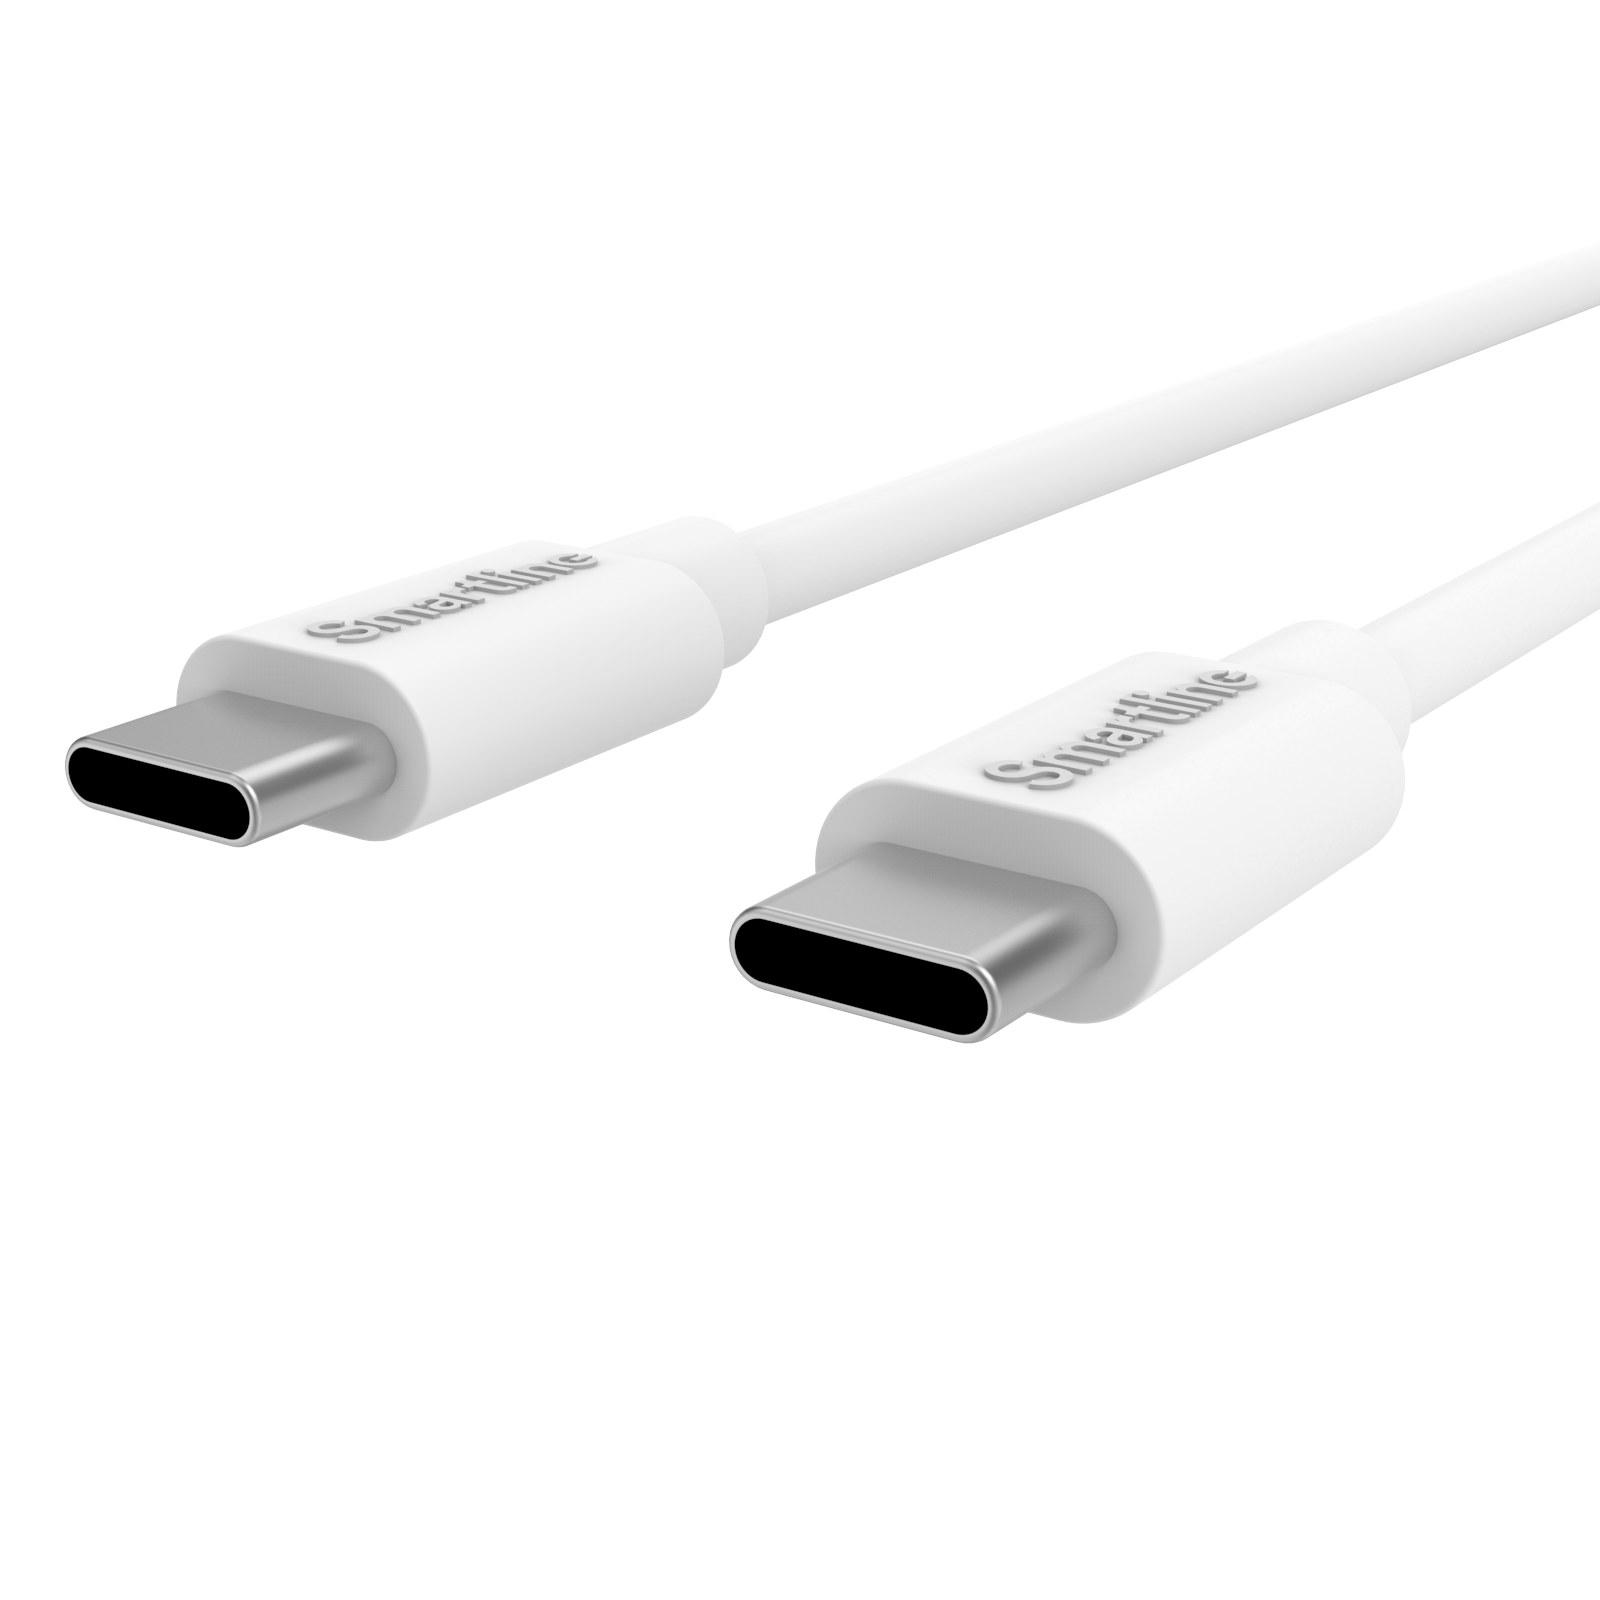 Premium Charger Motorola Moto E14 - 2 meter Cable and Dual Wall Charger USB-C 35W - Smartline